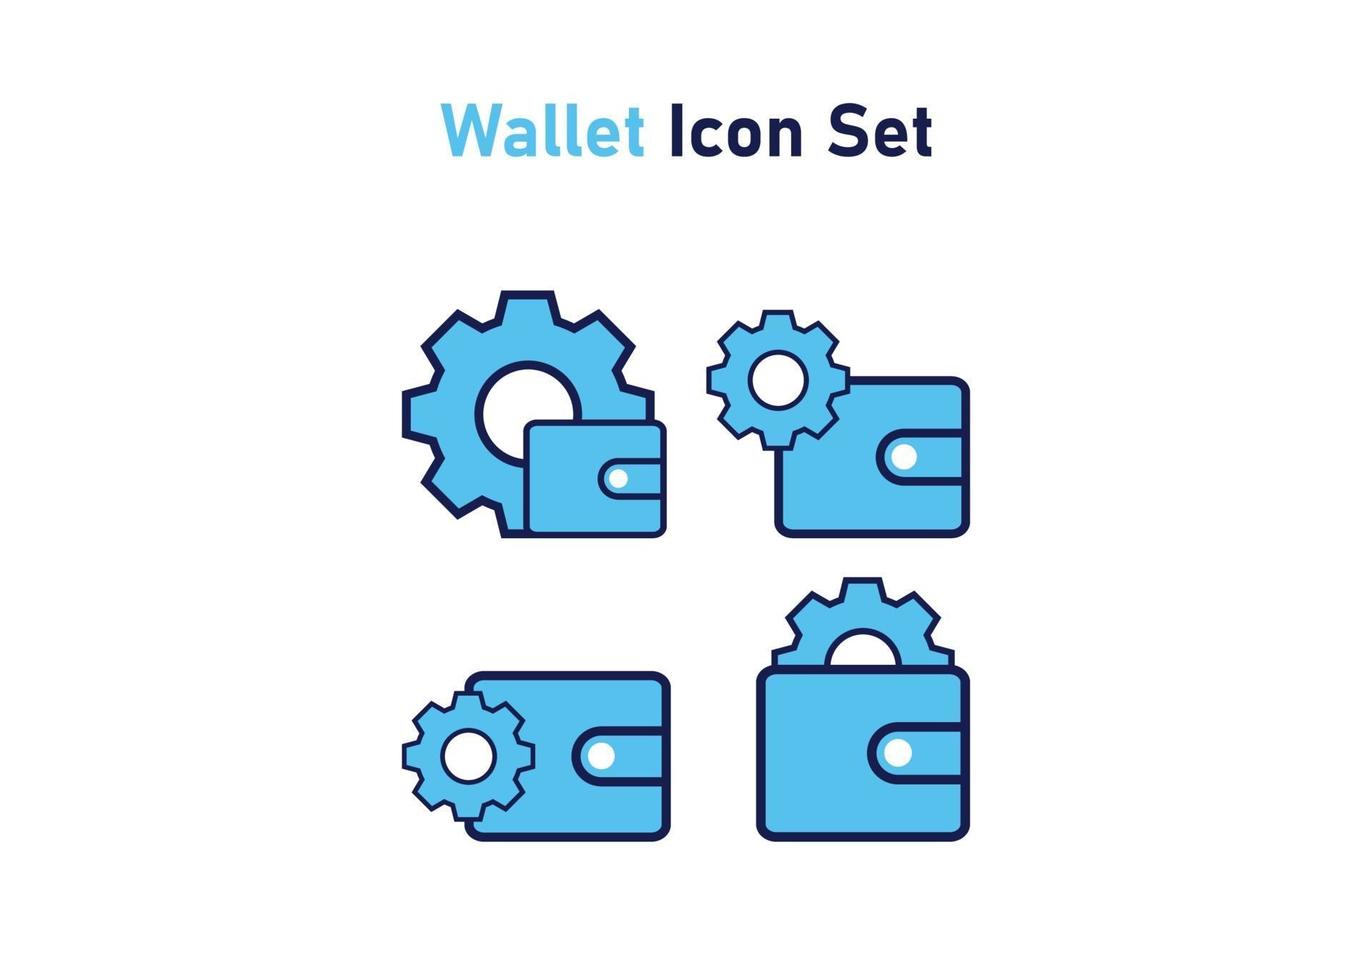 payment, financial setting icon vector